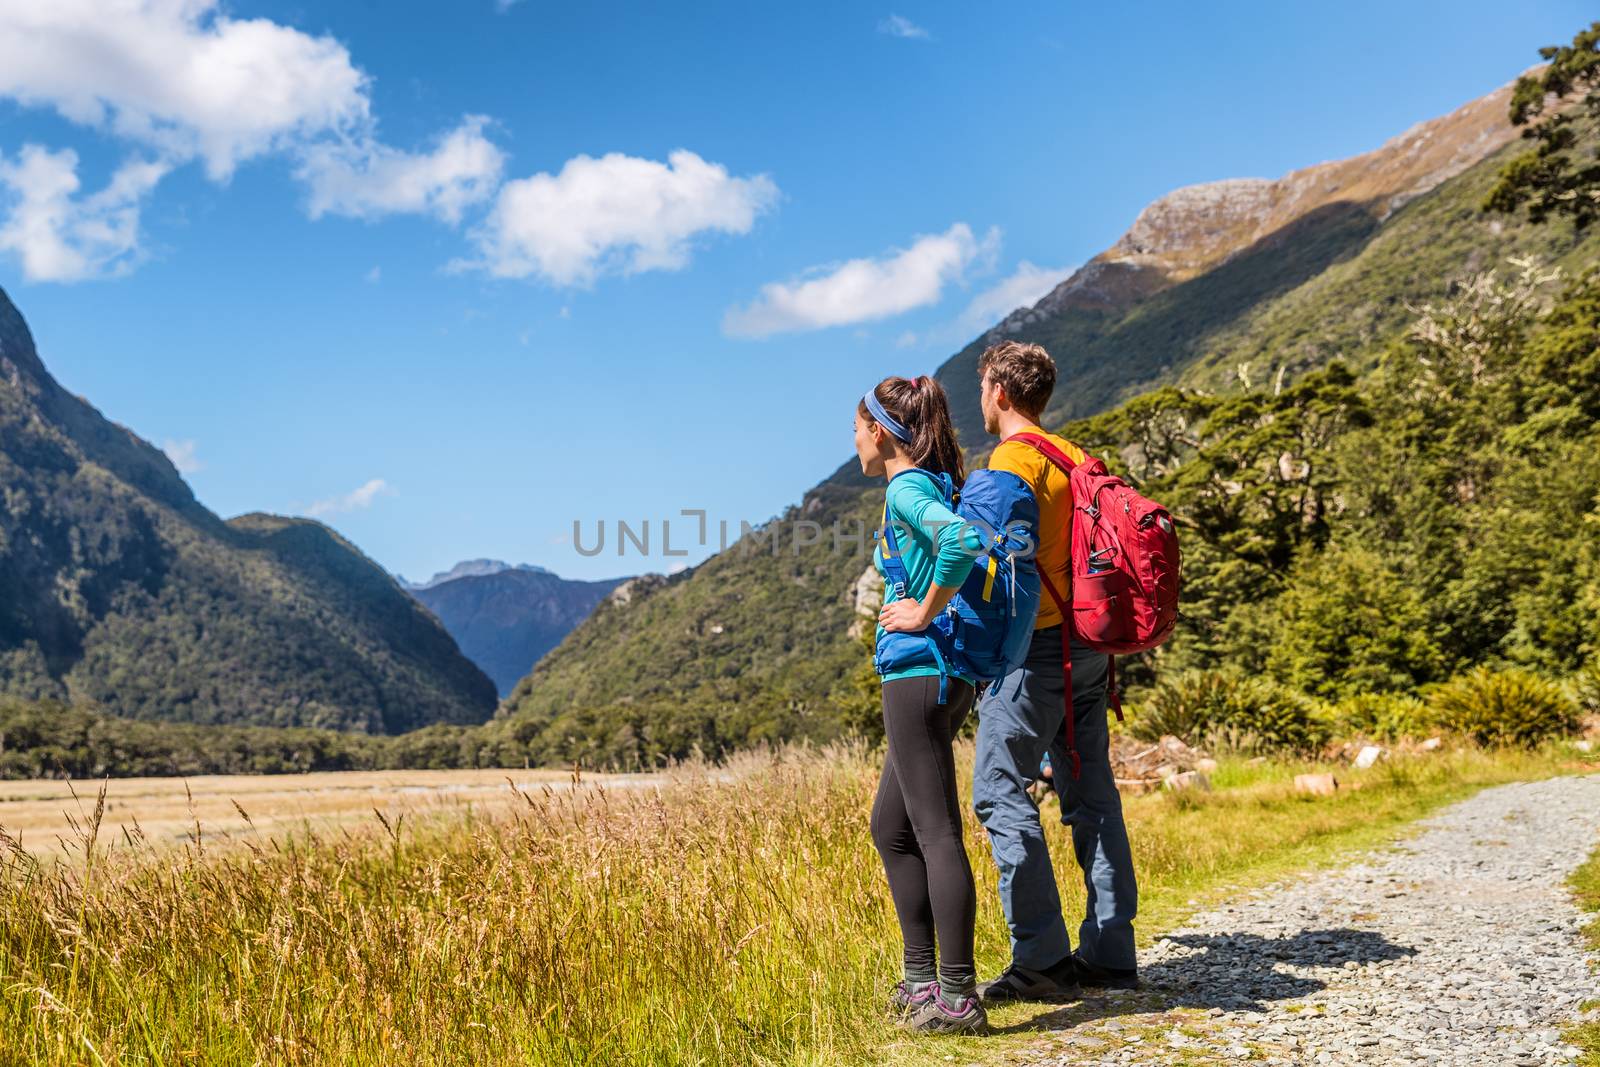 New Zealand hikers backpackers tramping on Routeburn Track, famous trail in the South Island of New Zealand. Couple looking at nature landscape. Fiordland & Mount Aspiring National Park, New Zealand by Maridav